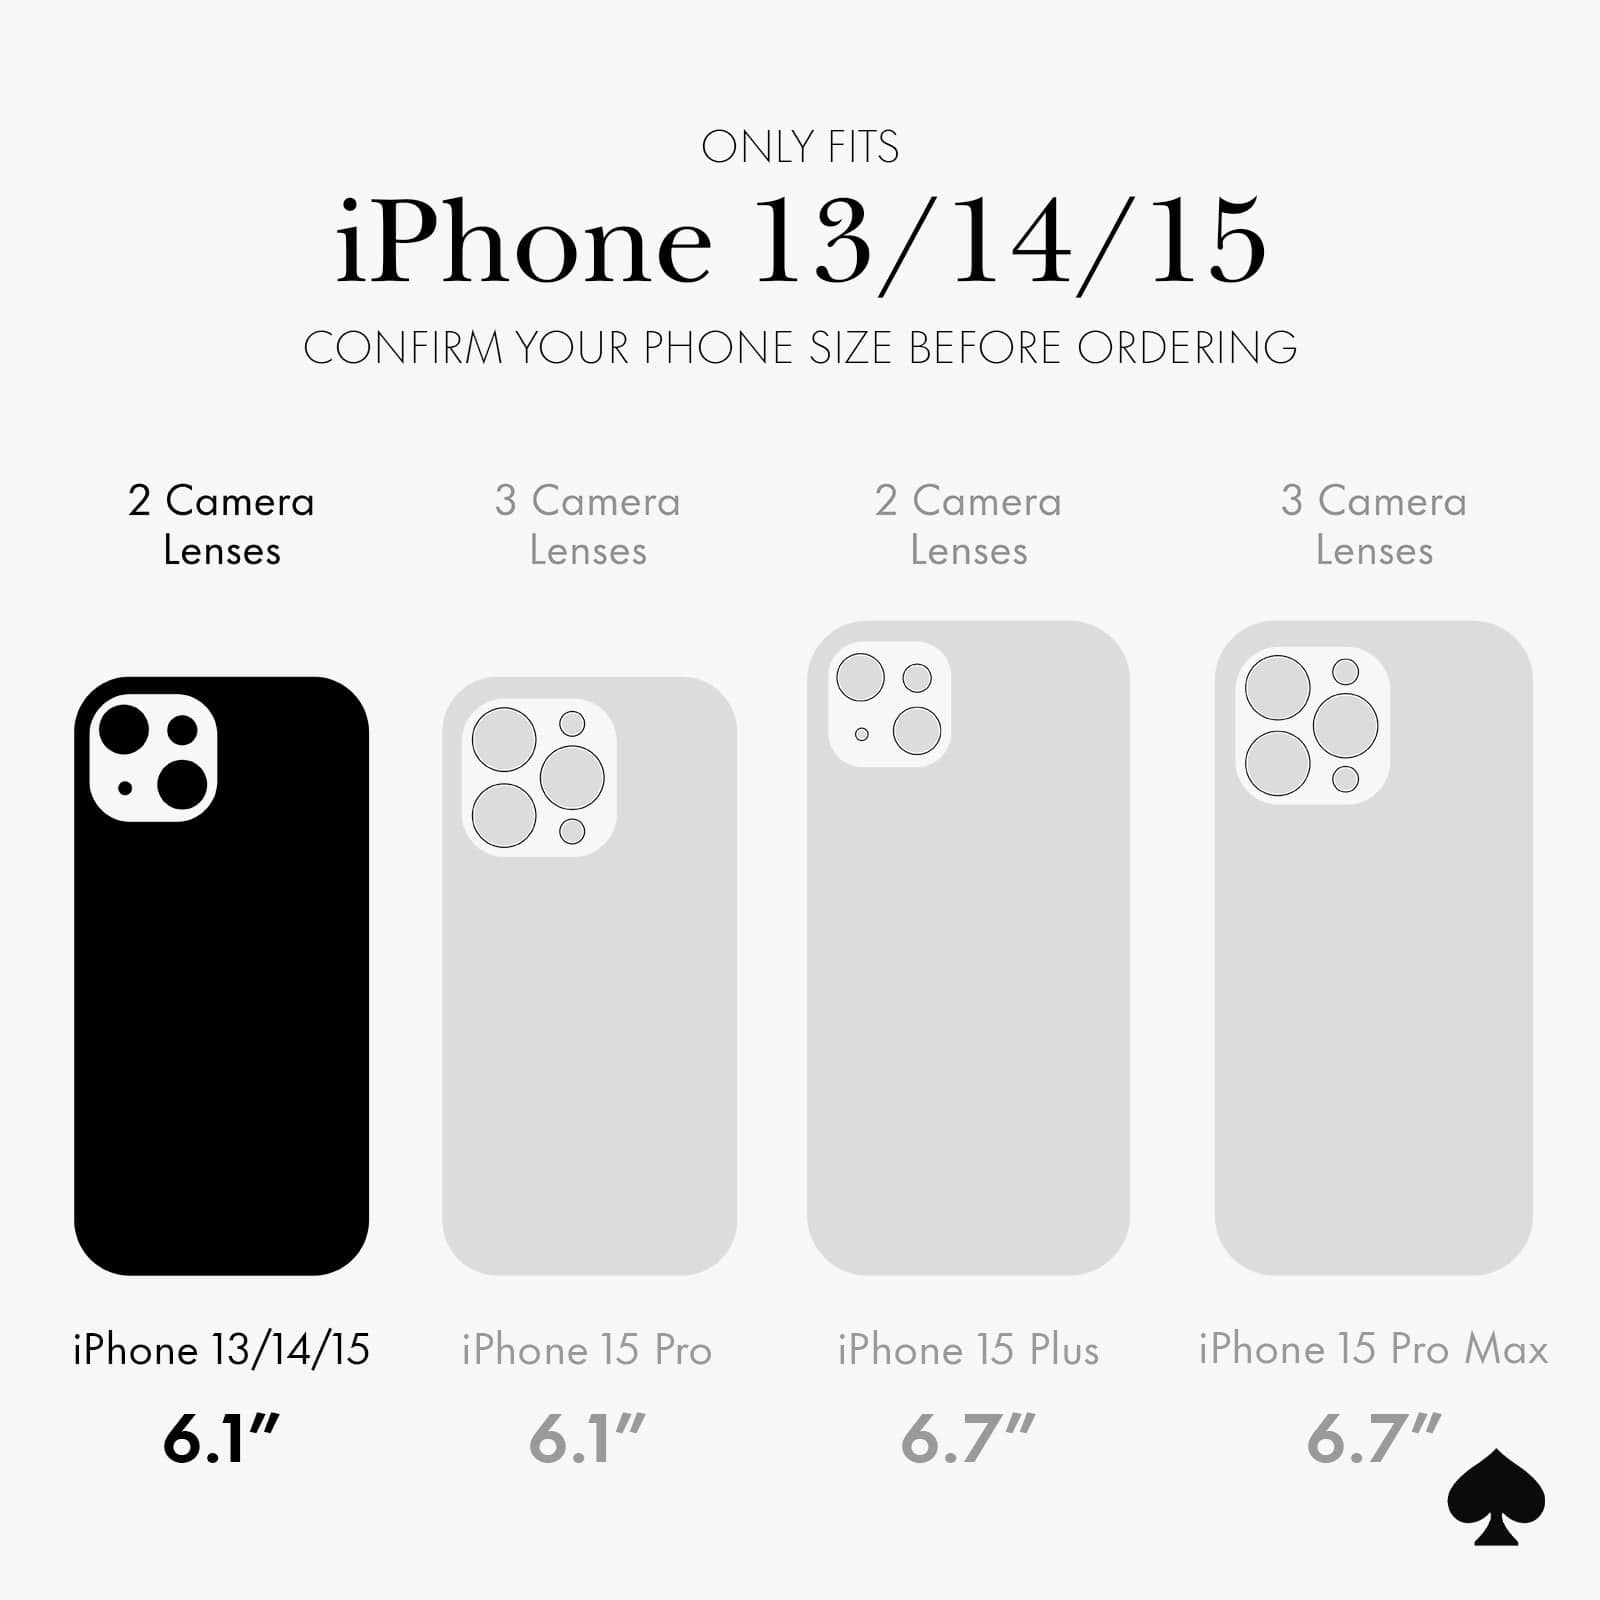 ONLY FITS IPHONE 13/ 14/ 15. CONFIRM YOUR PHONE SIZE BEFORE ORDERING